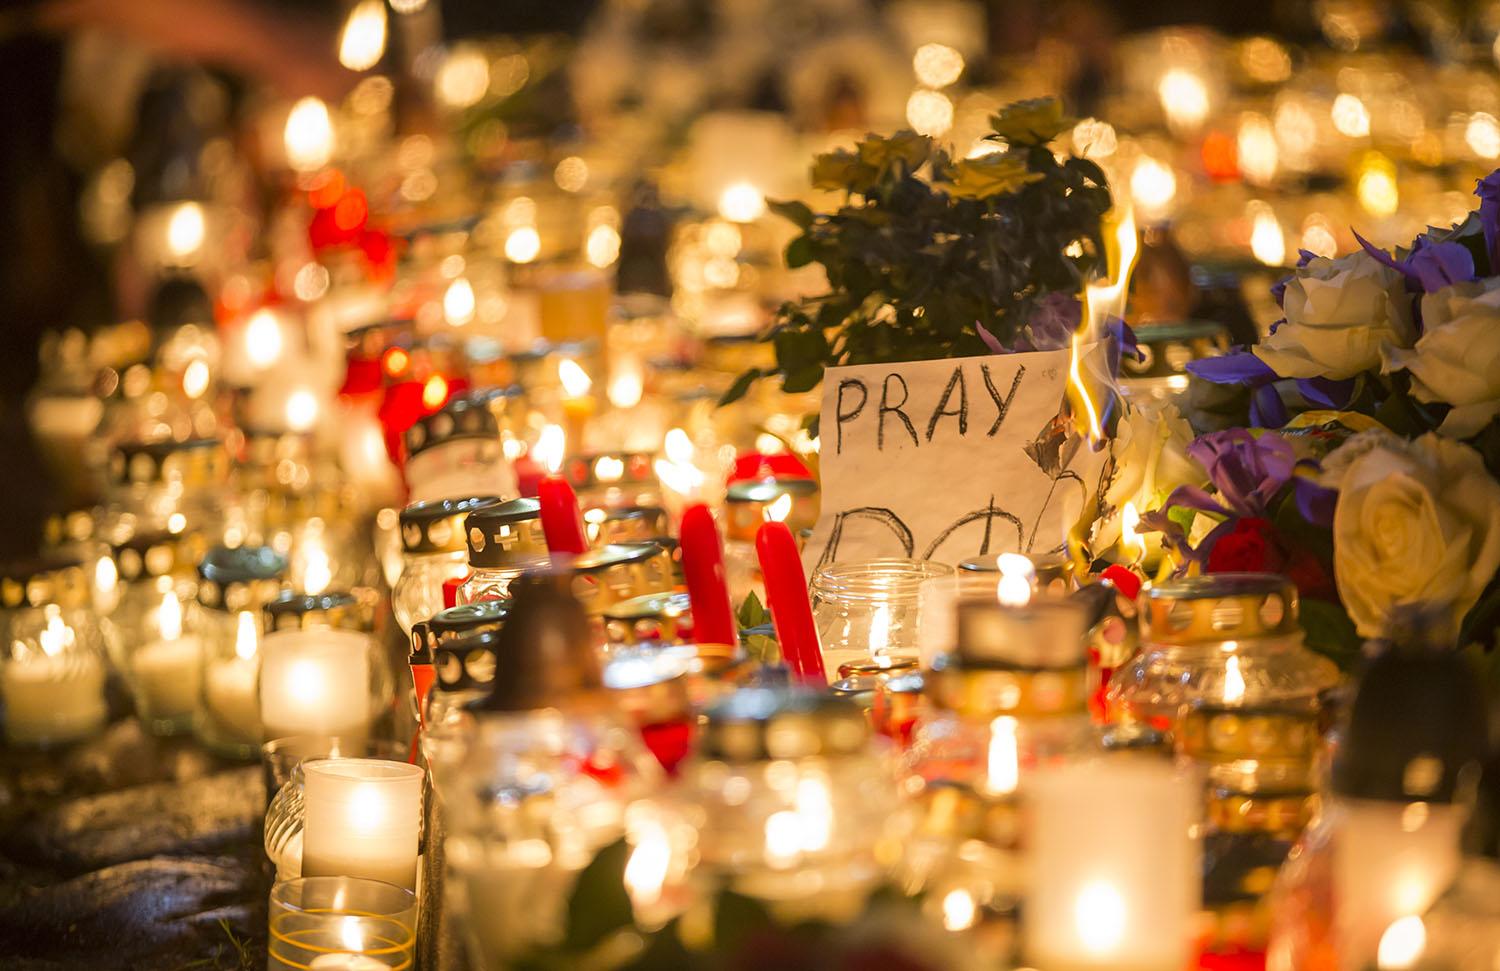 All+three+TCU+students+studying+abroad+in+Paris+are+reported+to+be+safe+following+several+attacks+and+explosions+throughout+the+city+on+Friday+Nov.+13.+